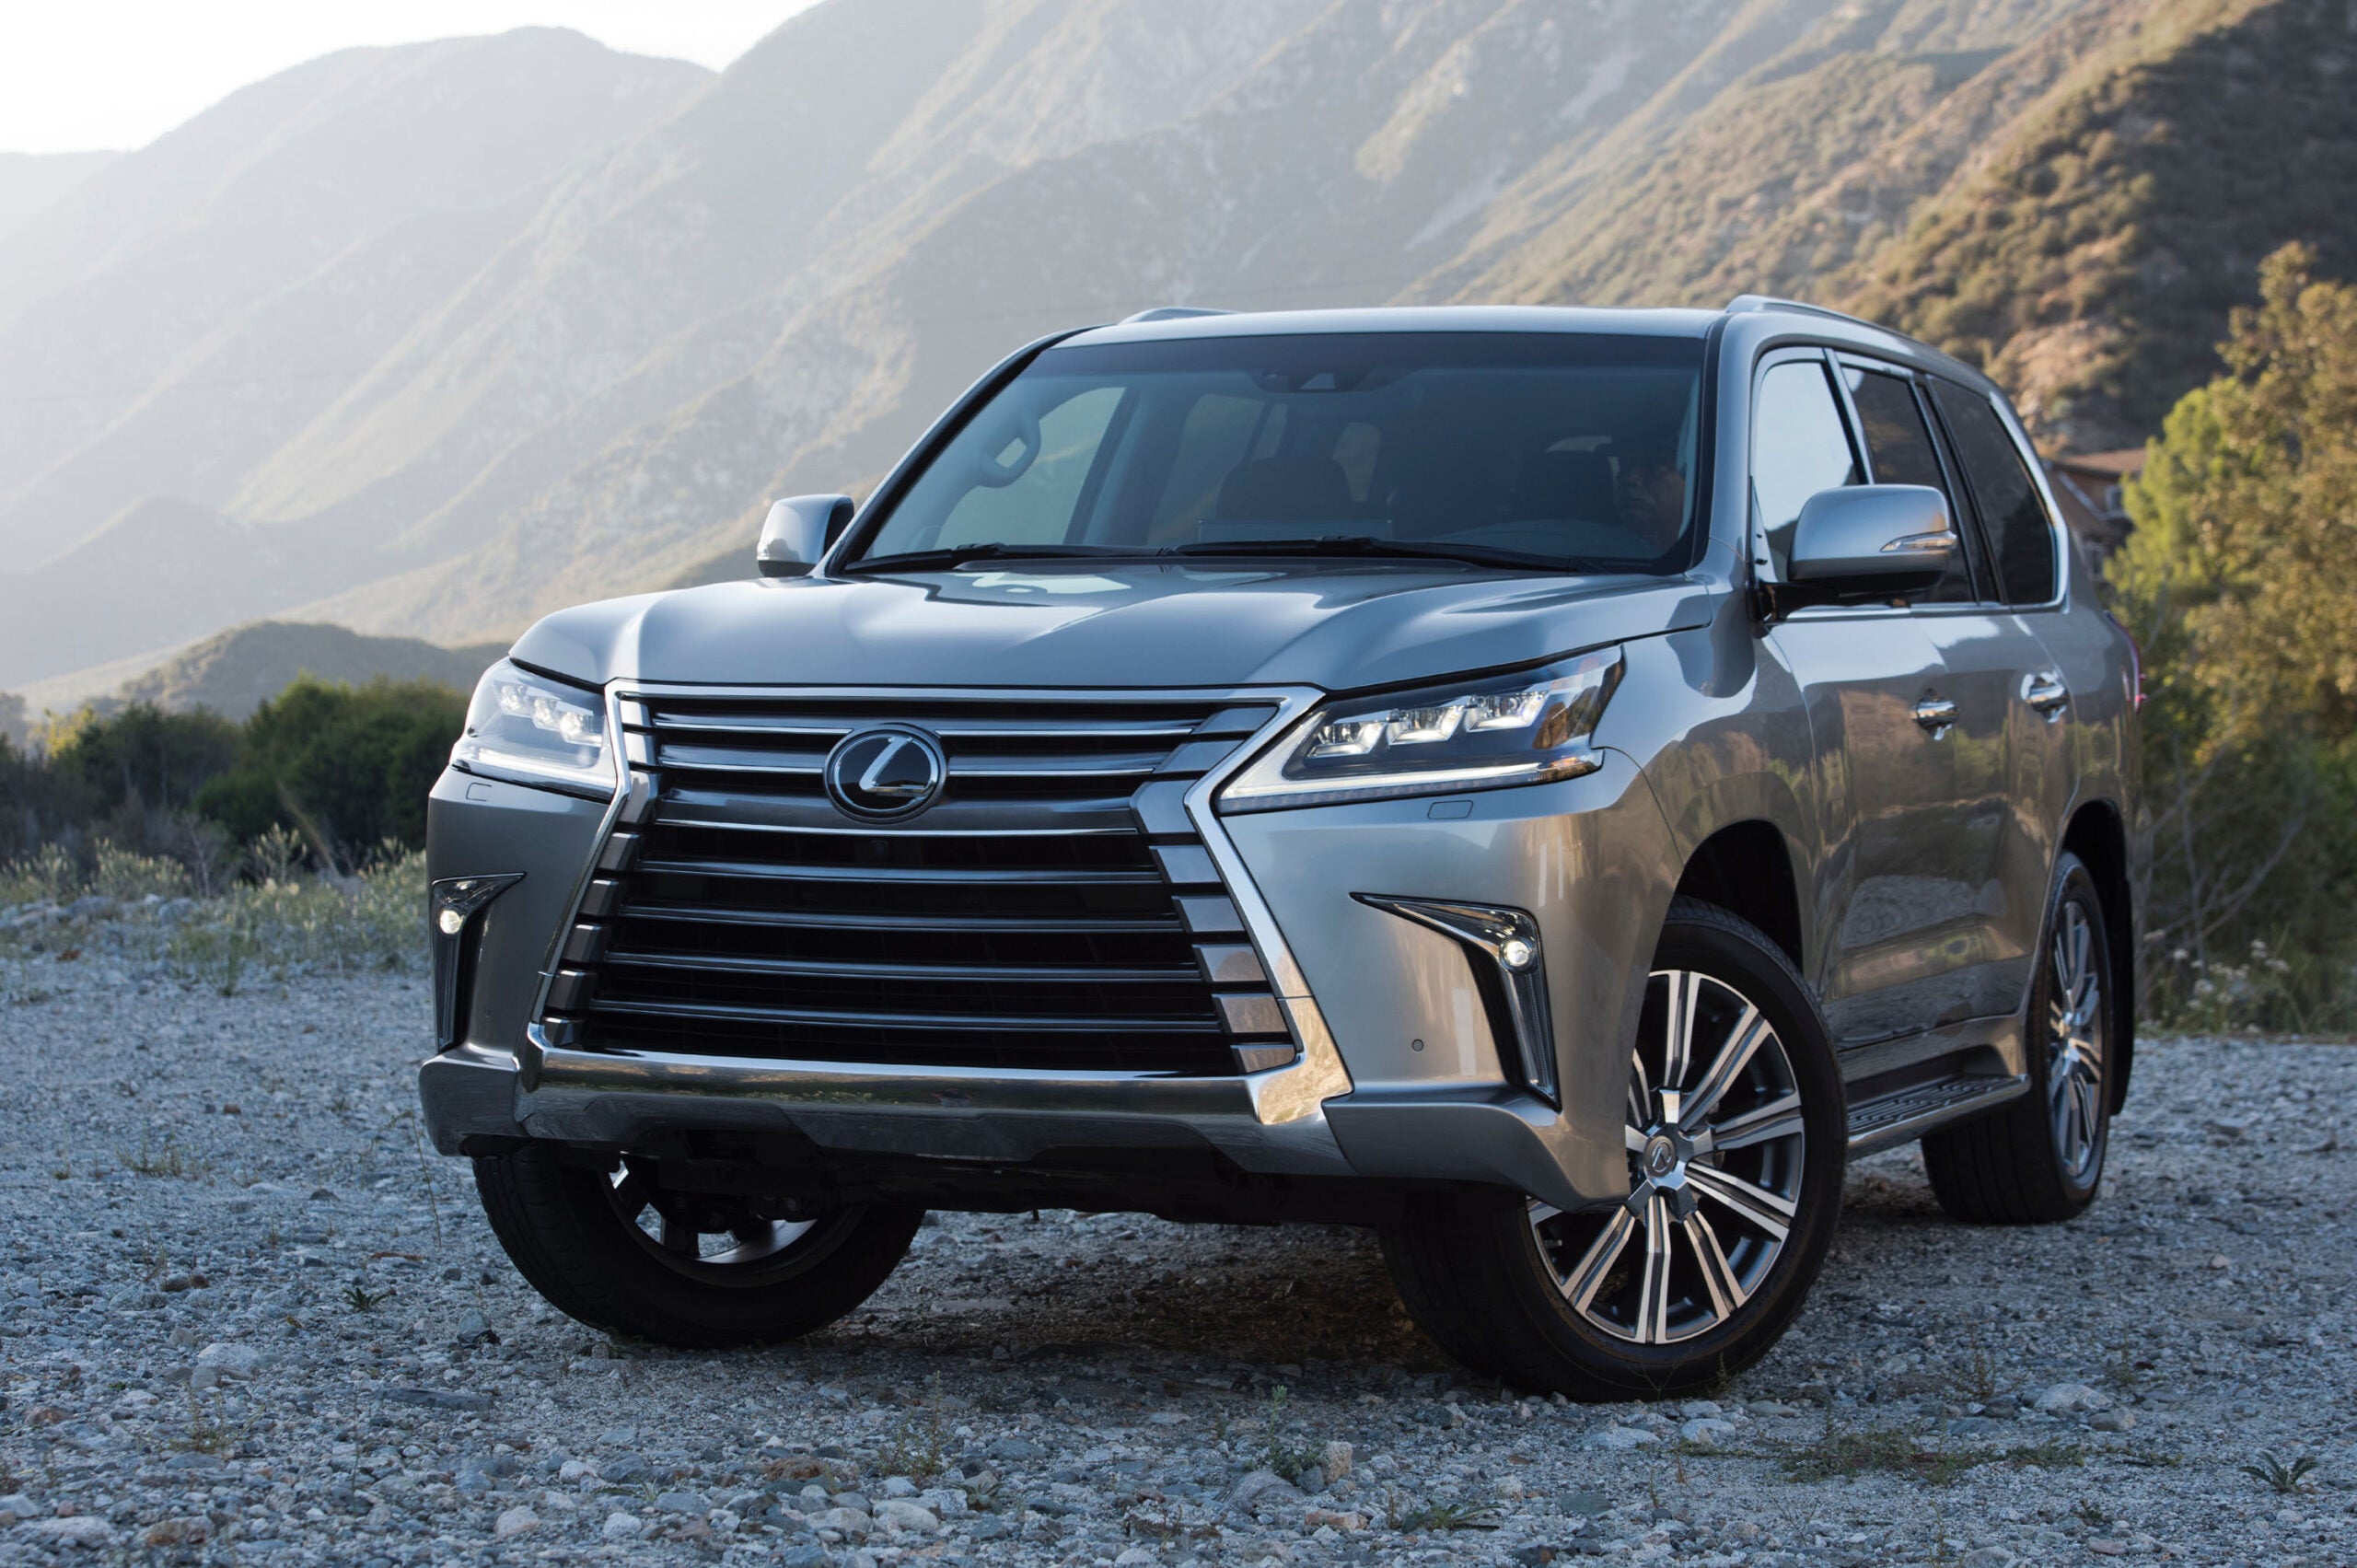 Check out these 7 luxury SUVs with true fourwheel drive